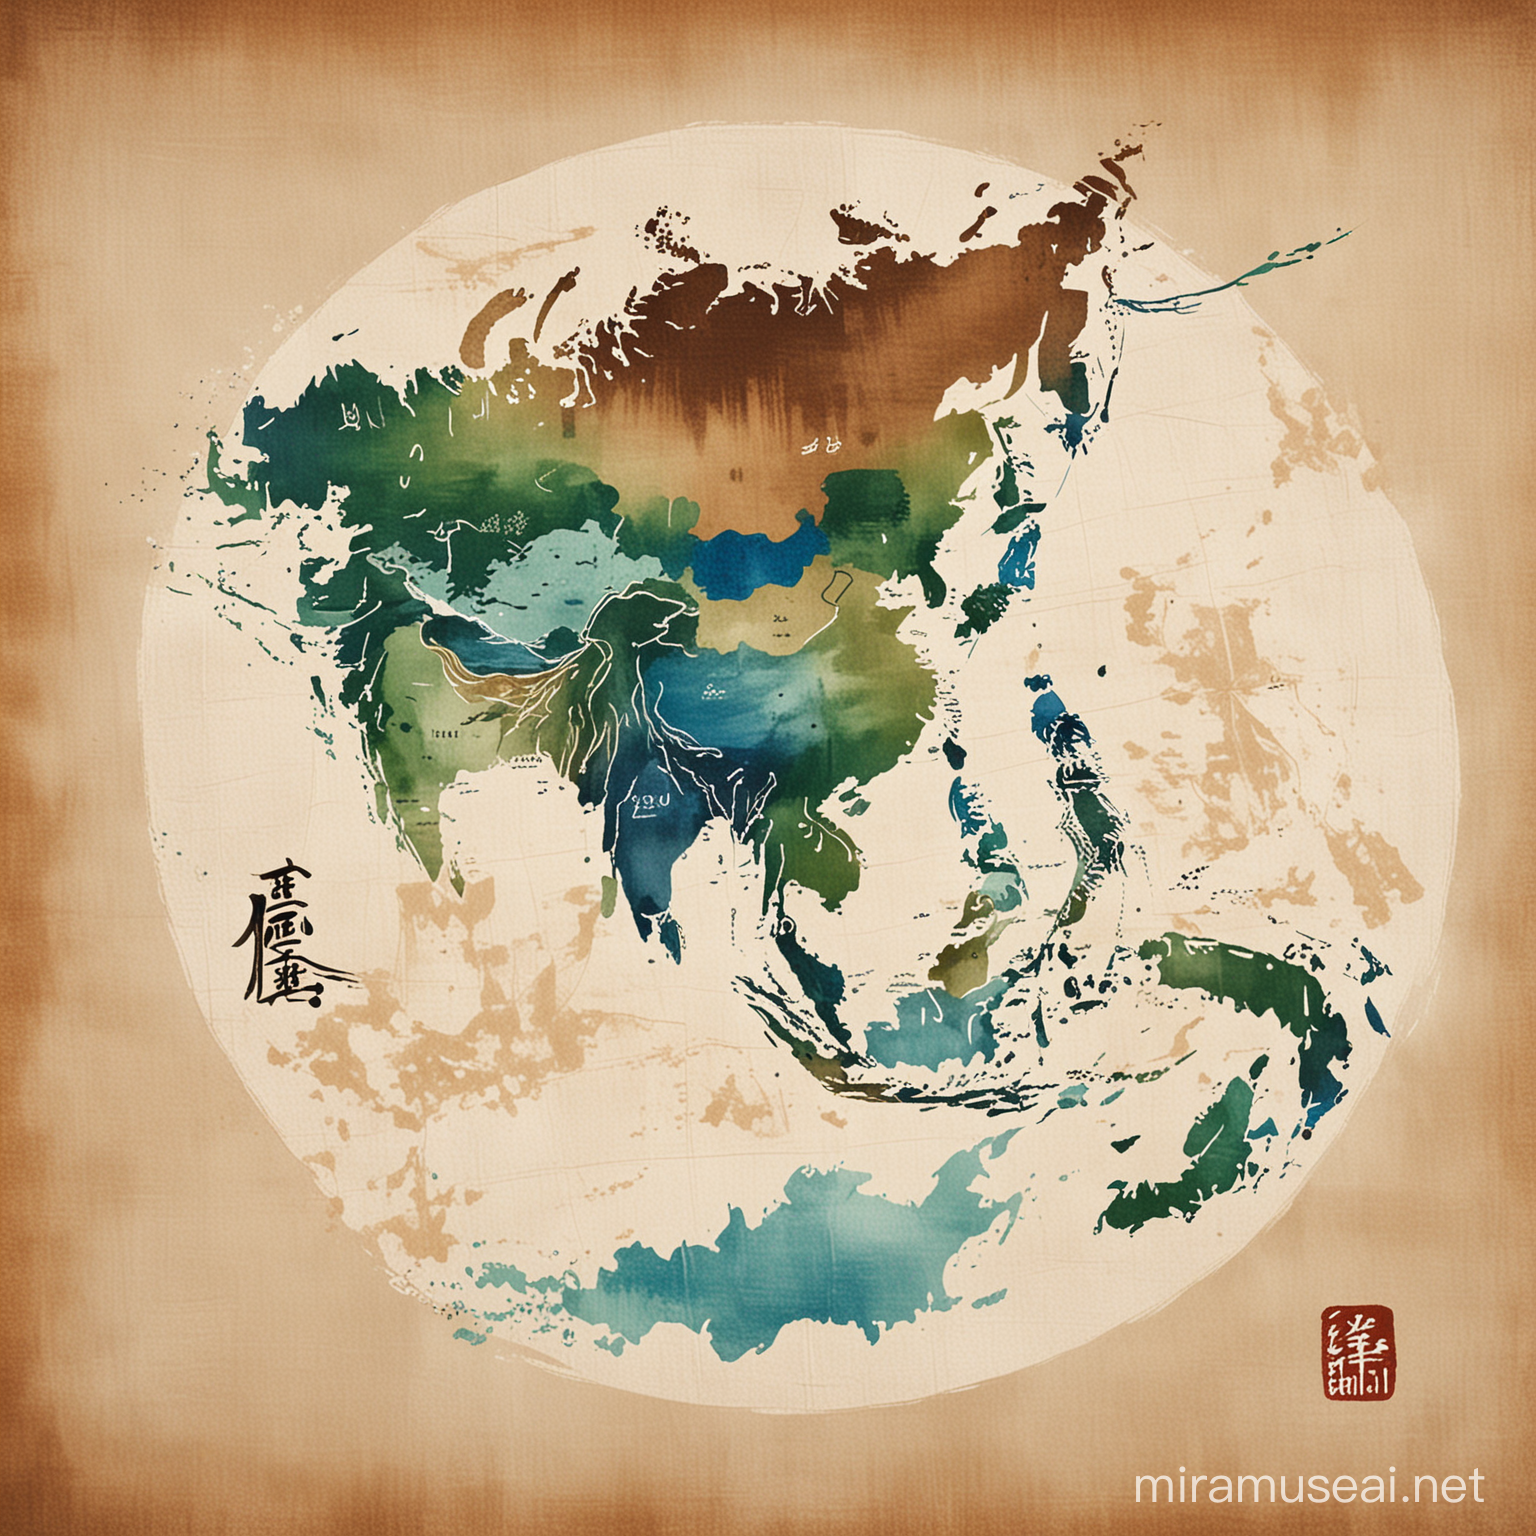 Earth Map Illustrated with Japanese Calligraphy Brushes on Canvas